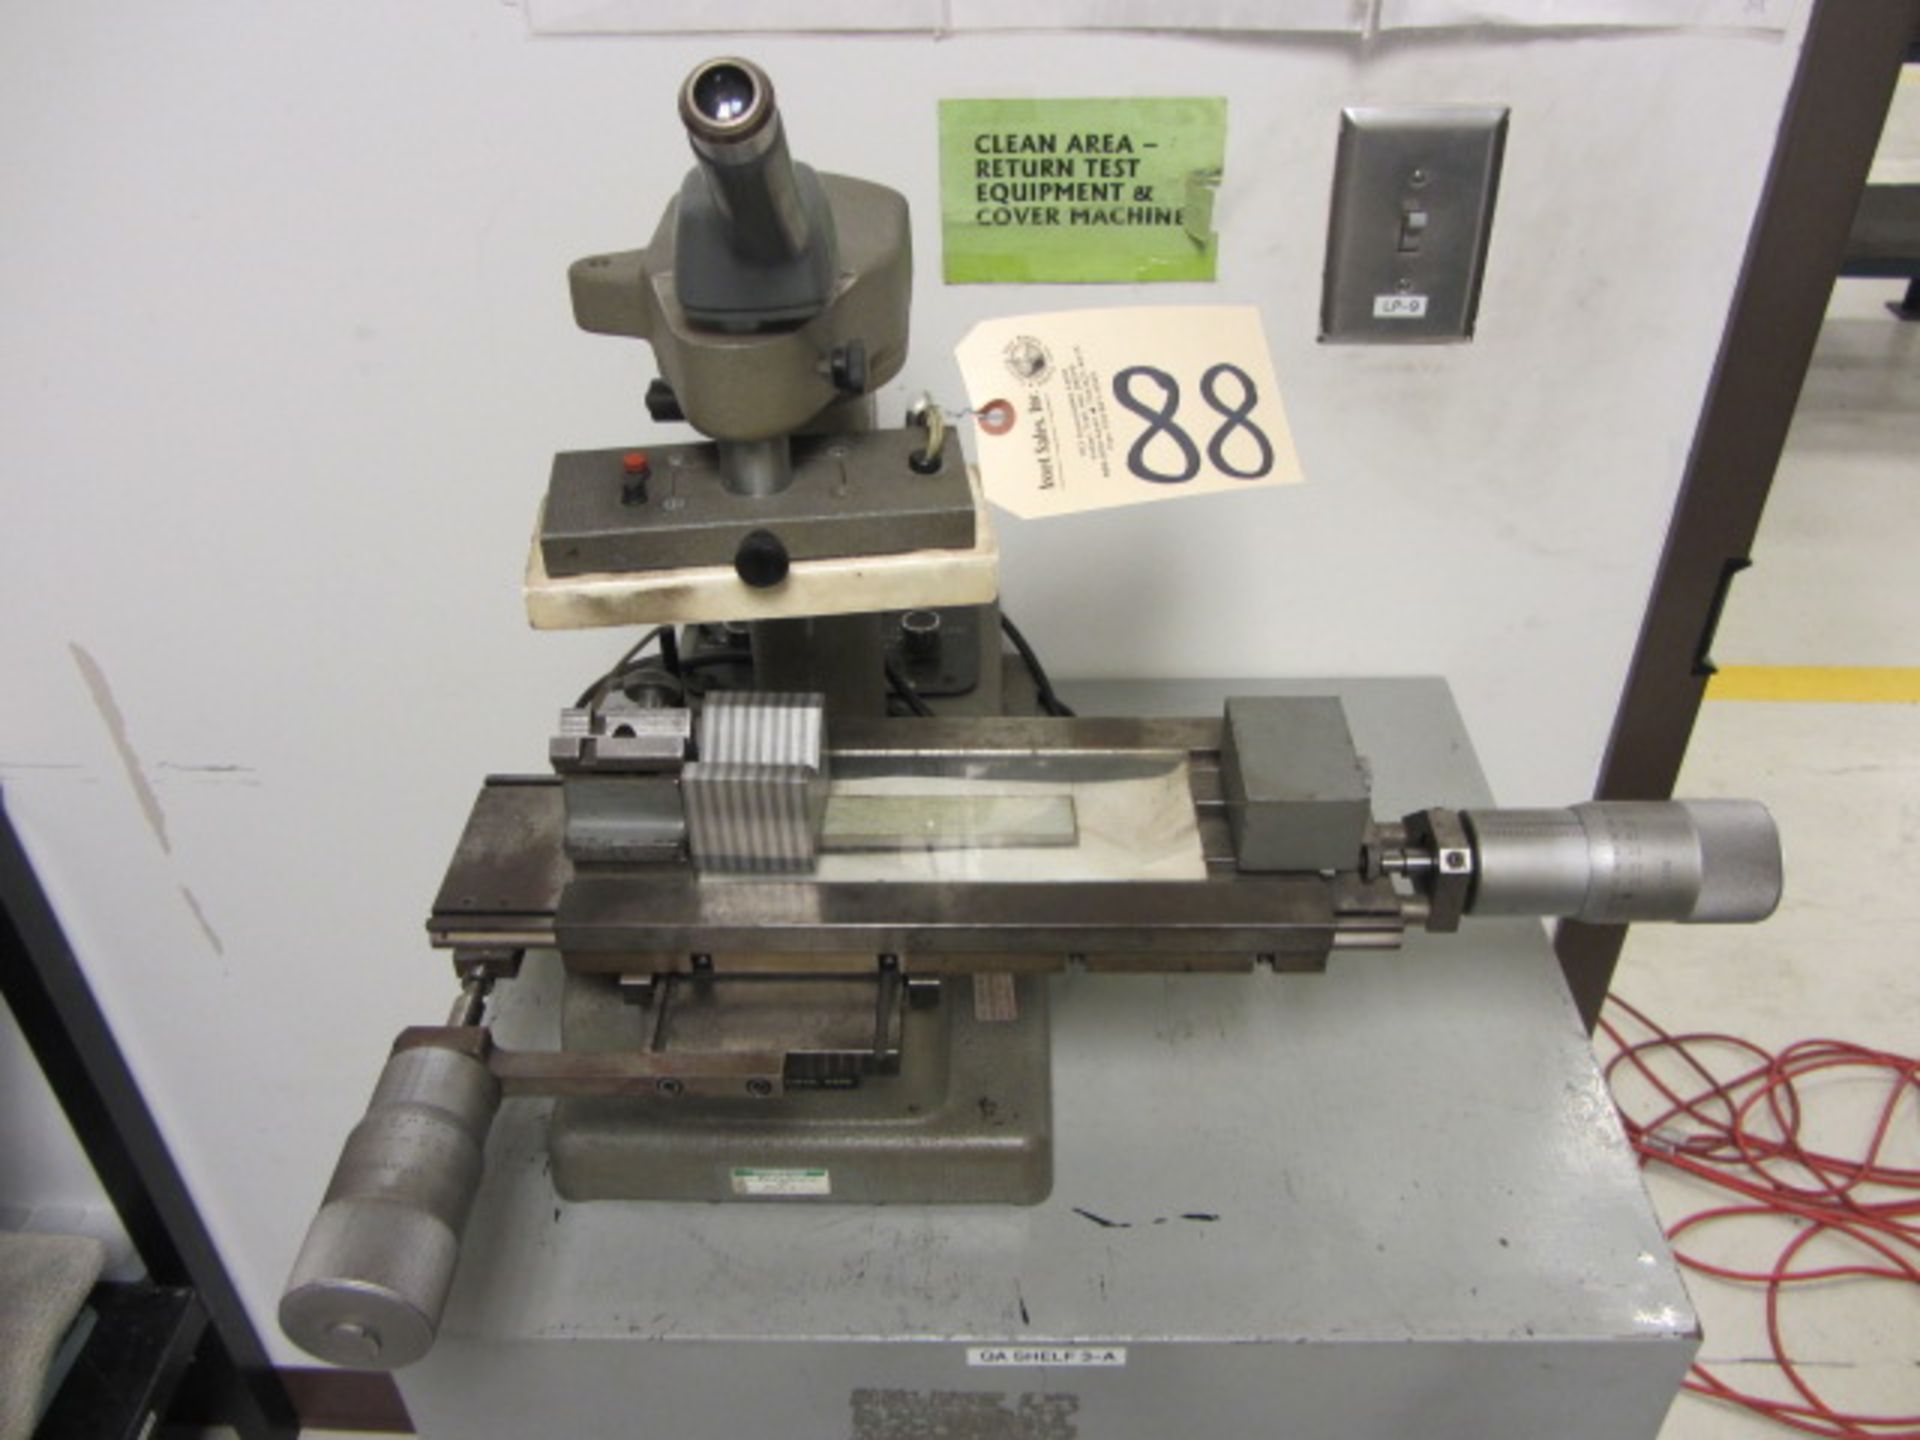 Stocker & Yale #5MB-171 Comparator